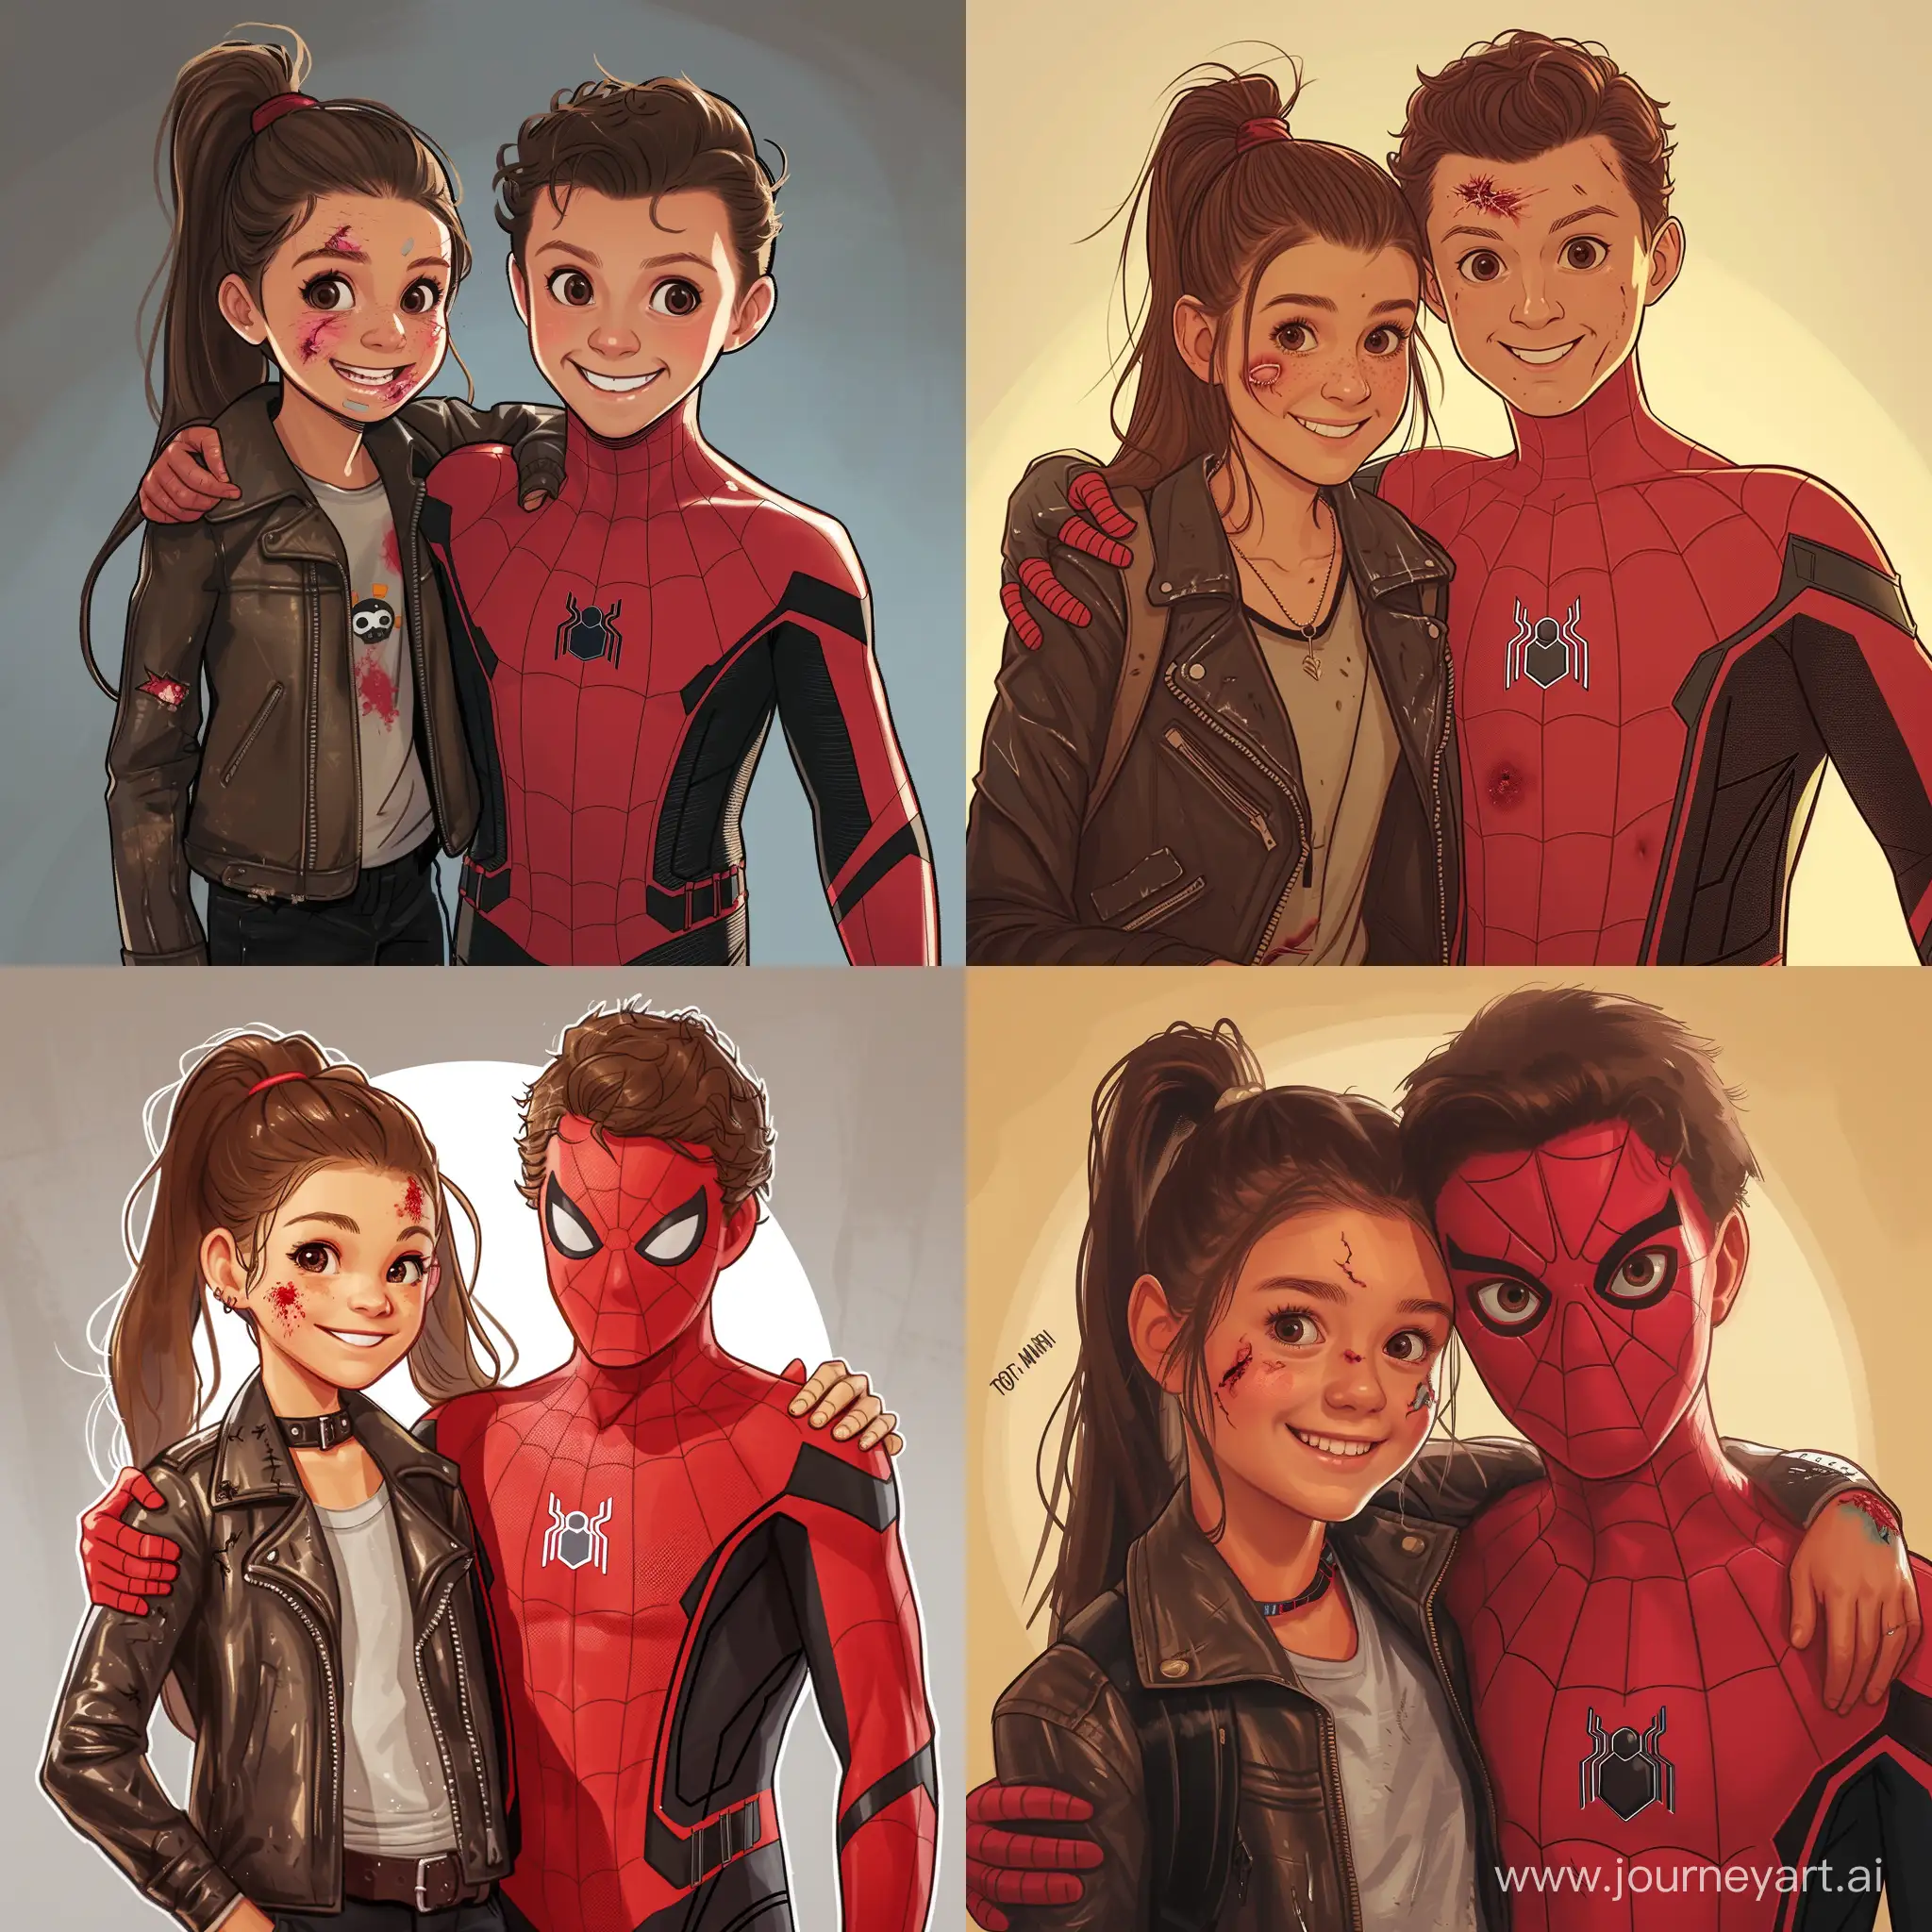 Adventurous-Teen-Girl-with-SpiderMan-Smirking-BrownHaired-Girl-and-Tom-Hollands-SpiderMan-in-Leather-Jacket-and-Ripped-Suit